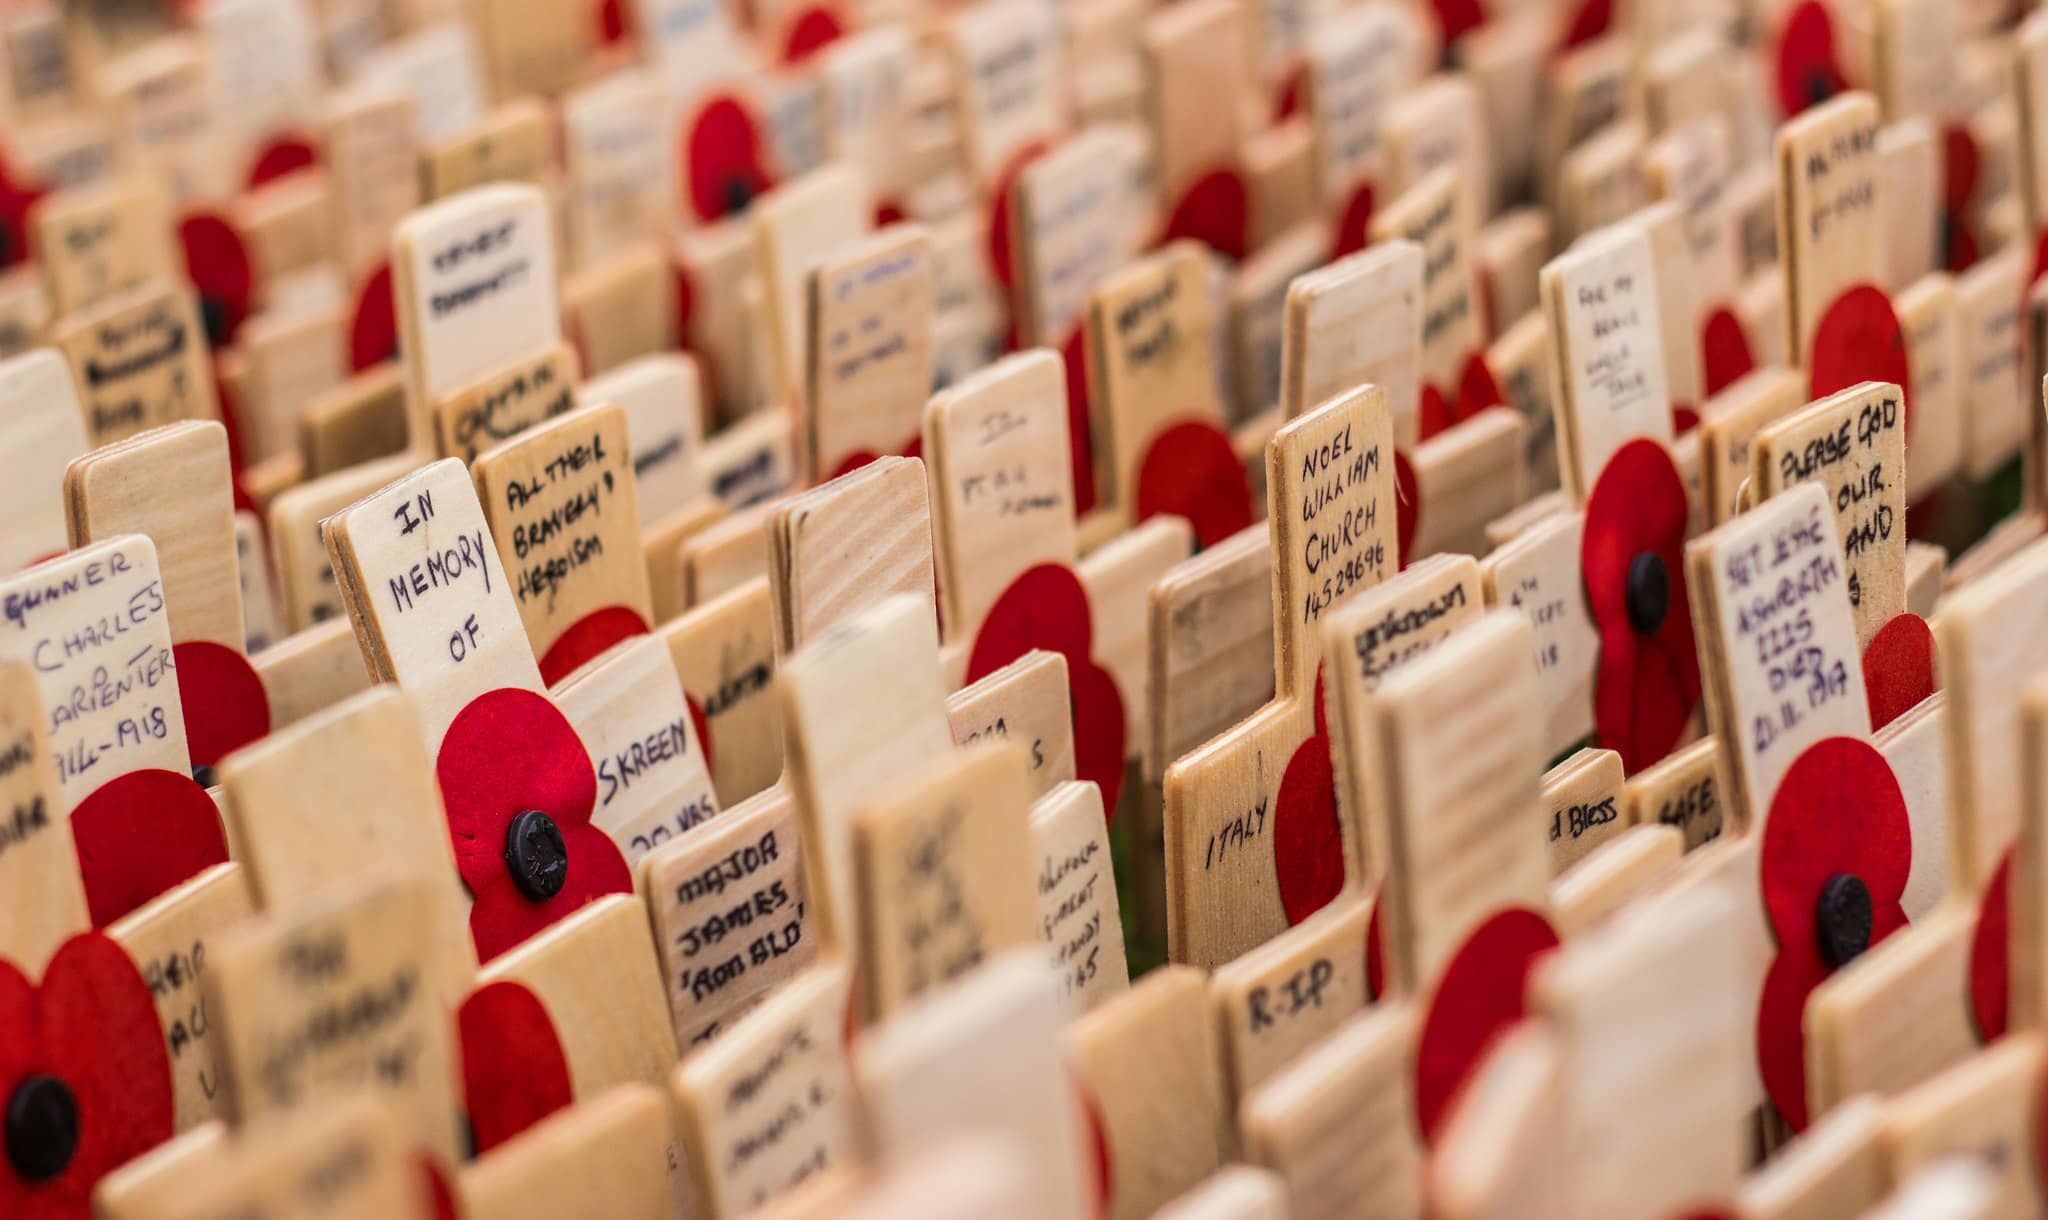 remembrance crosses and poppies